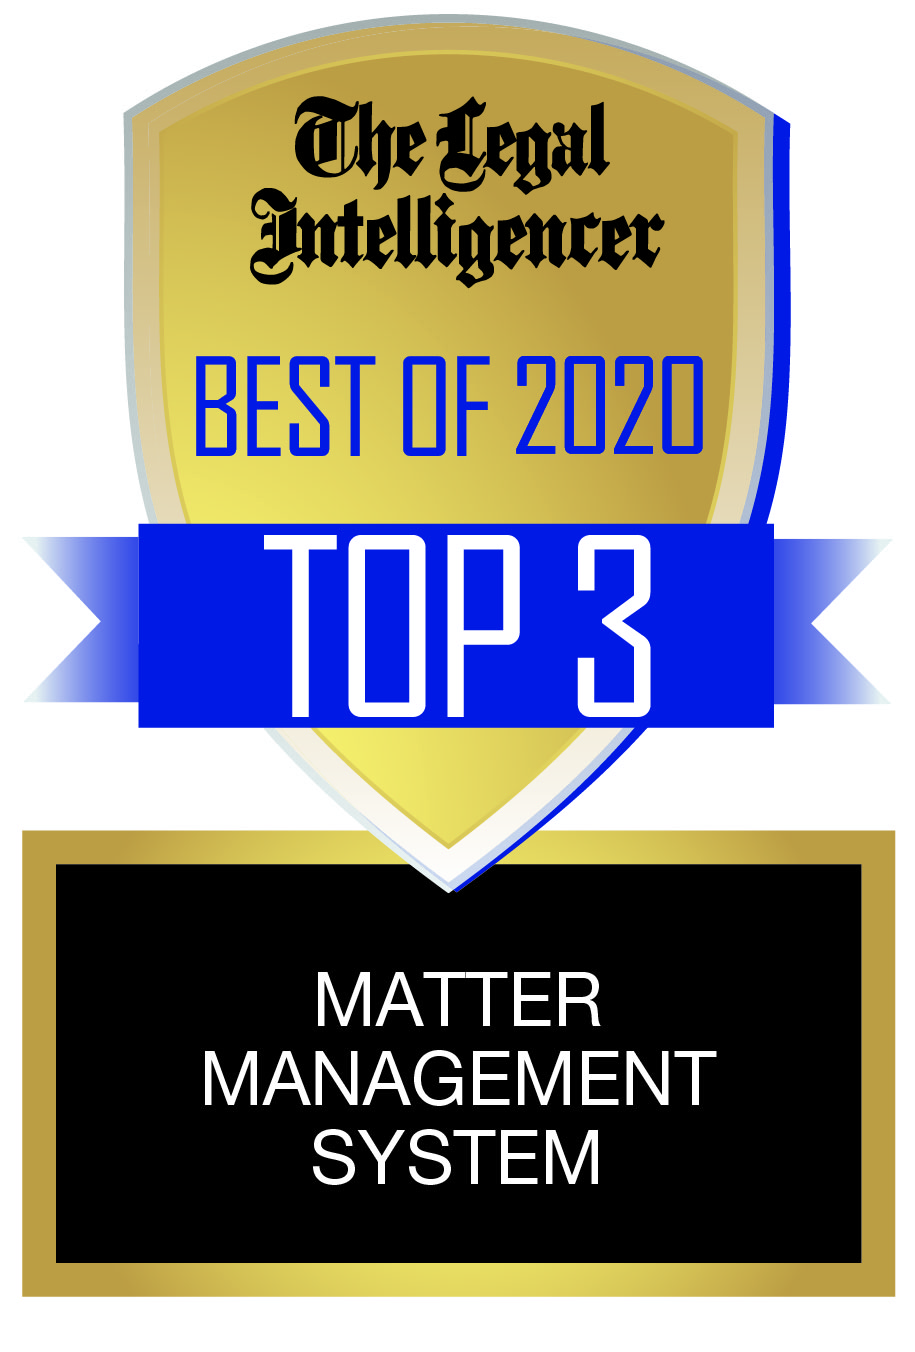 Readers of The Legal Intelligencer voted CSC as having the Best Matter Management System